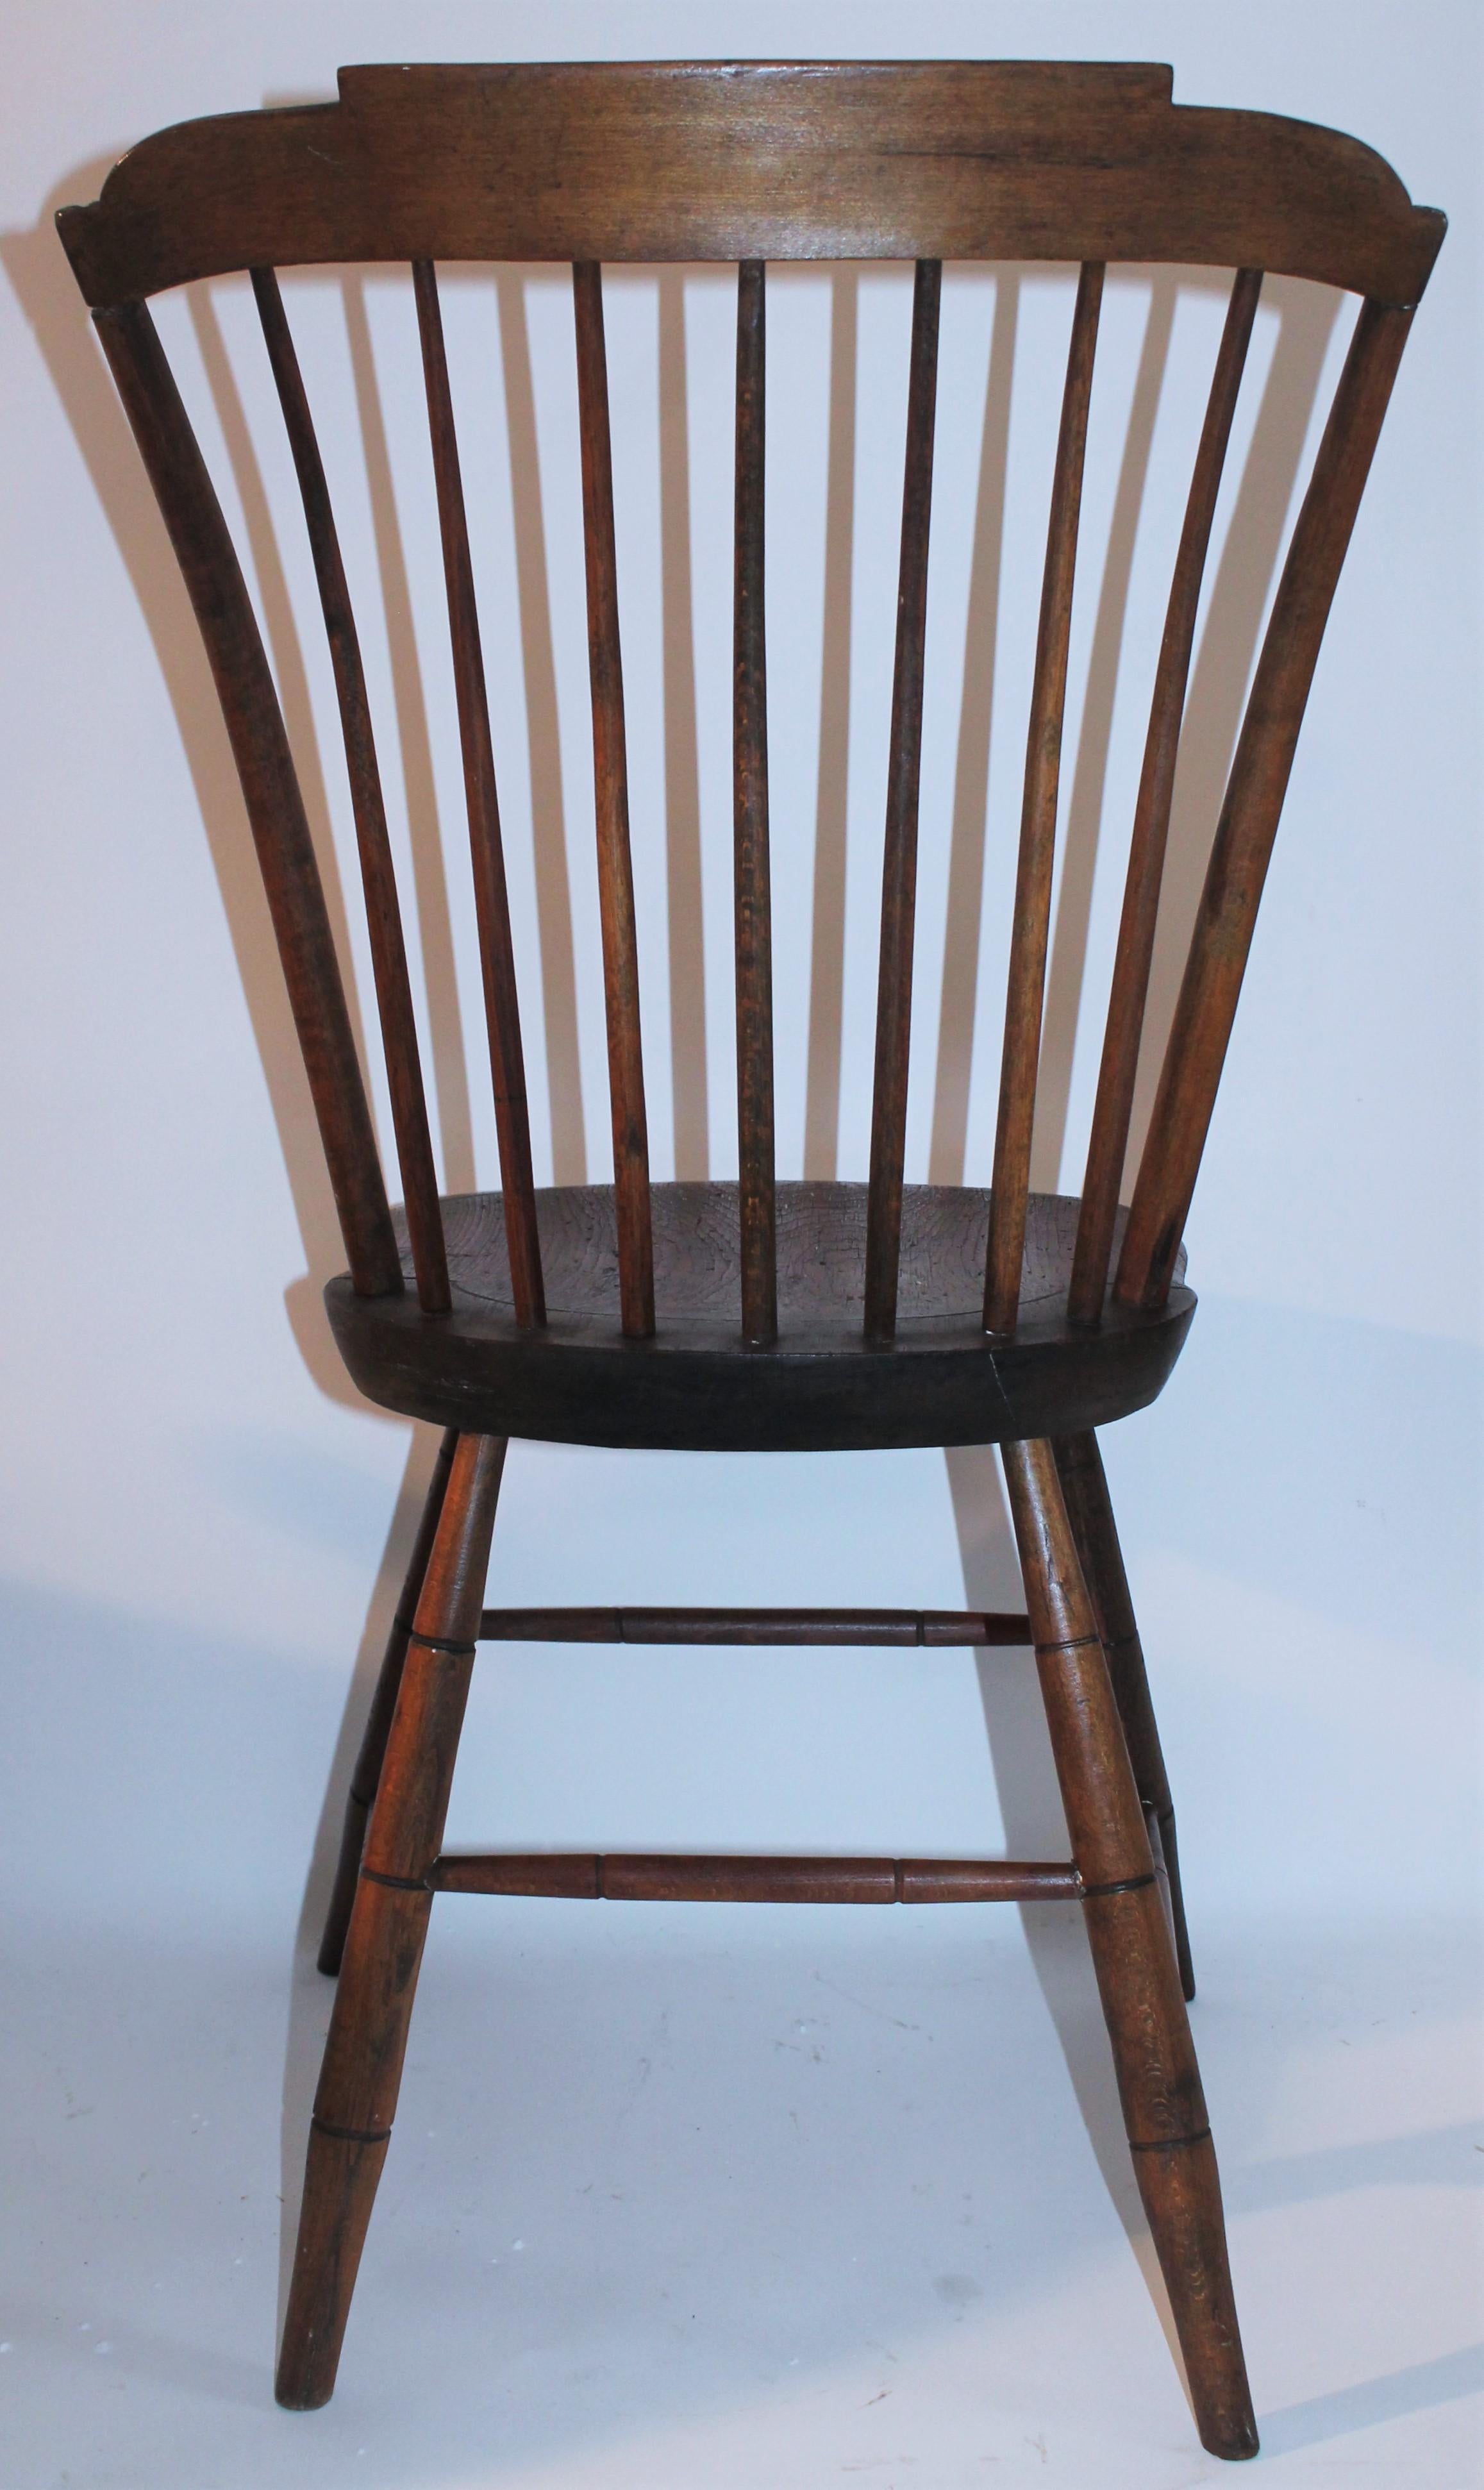 American Classical 18th Century Bow Back Signed S, KILBURN Windsor Chair